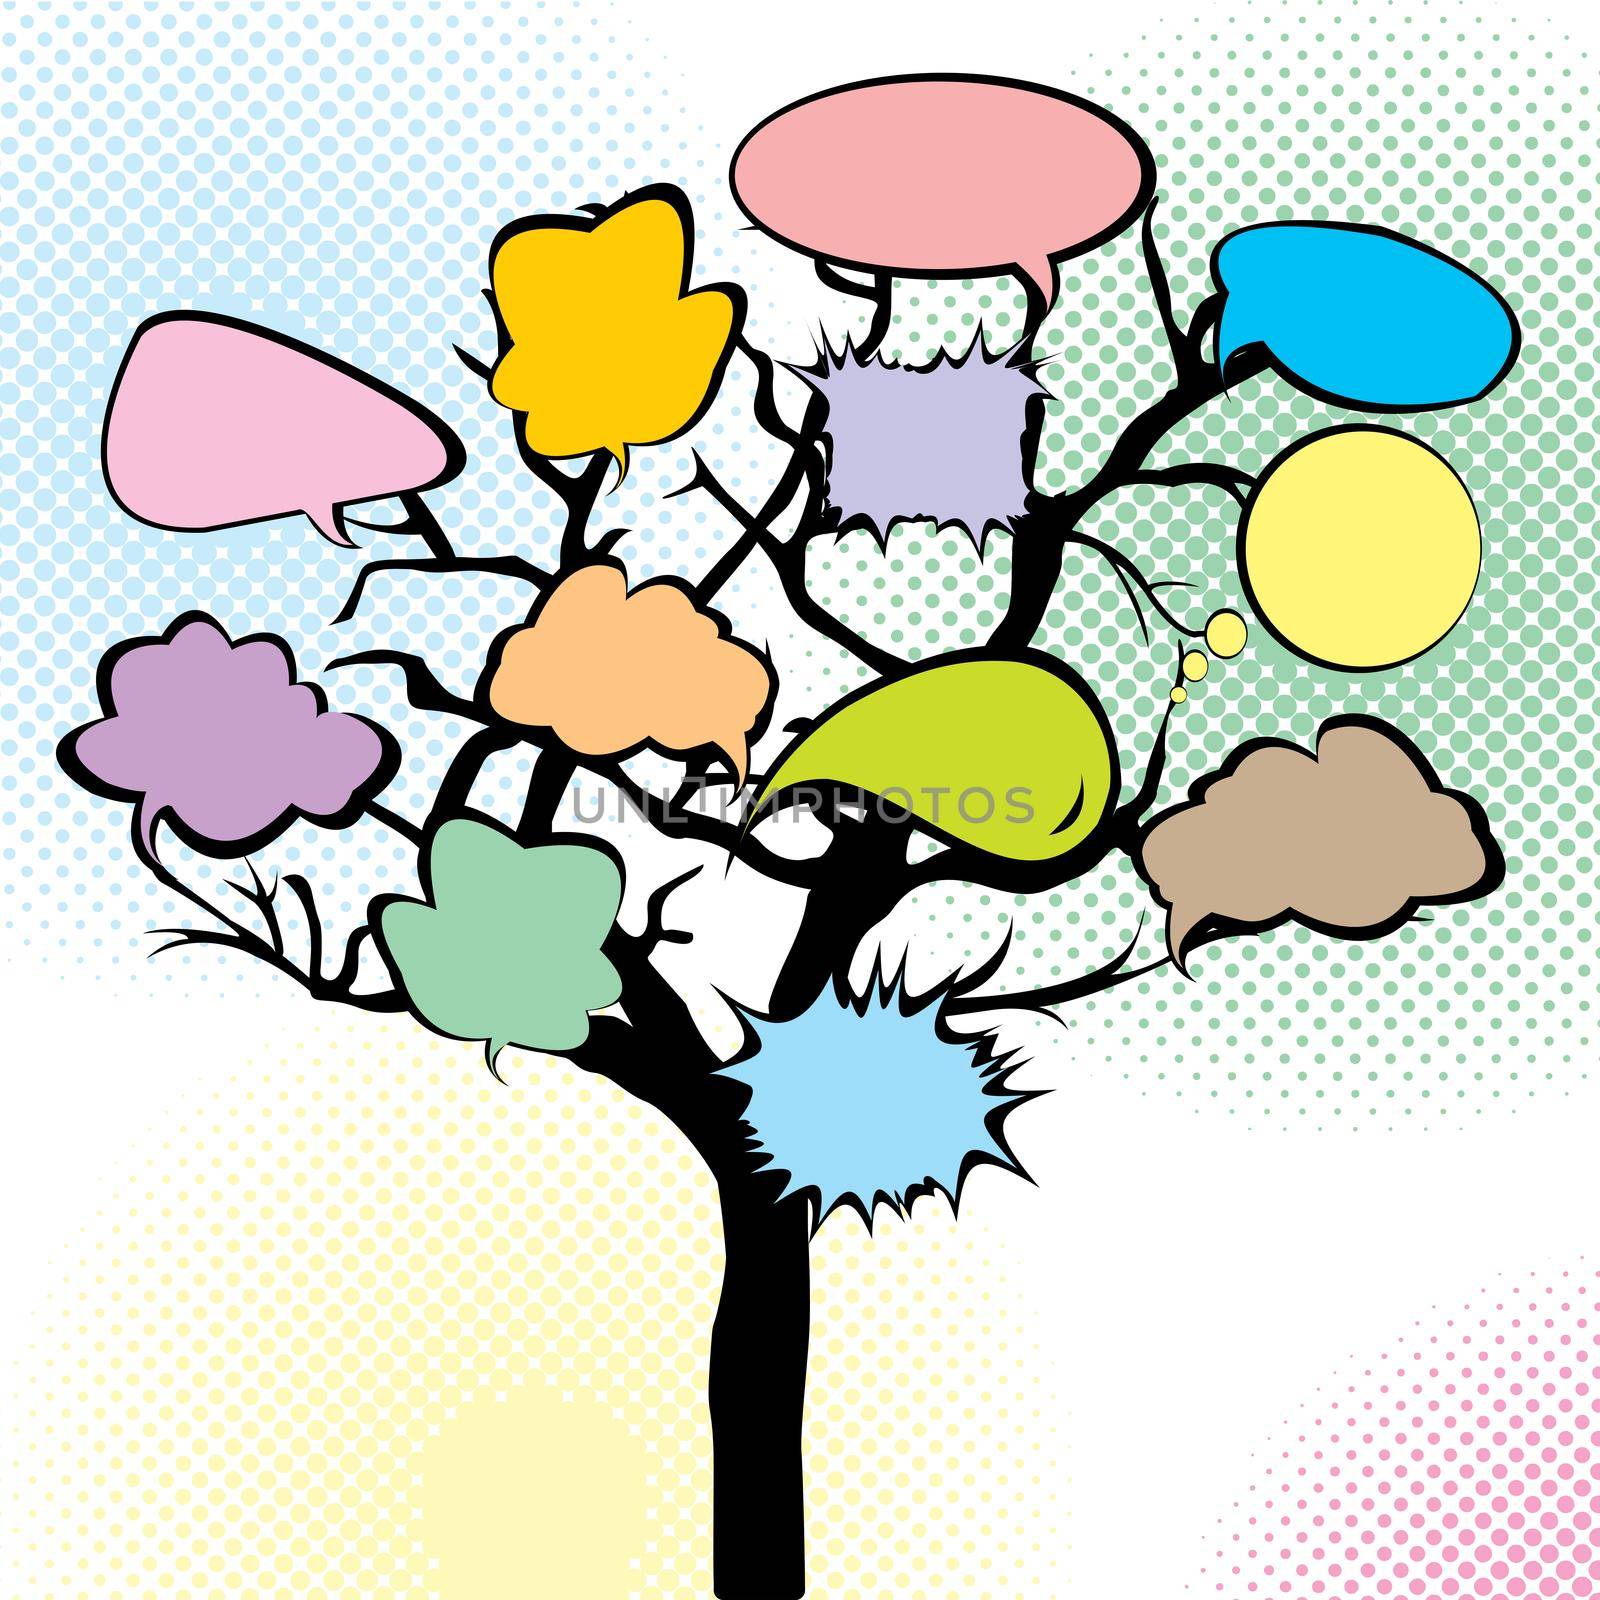 Abstract tree with colored speech bubbles by hibrida13